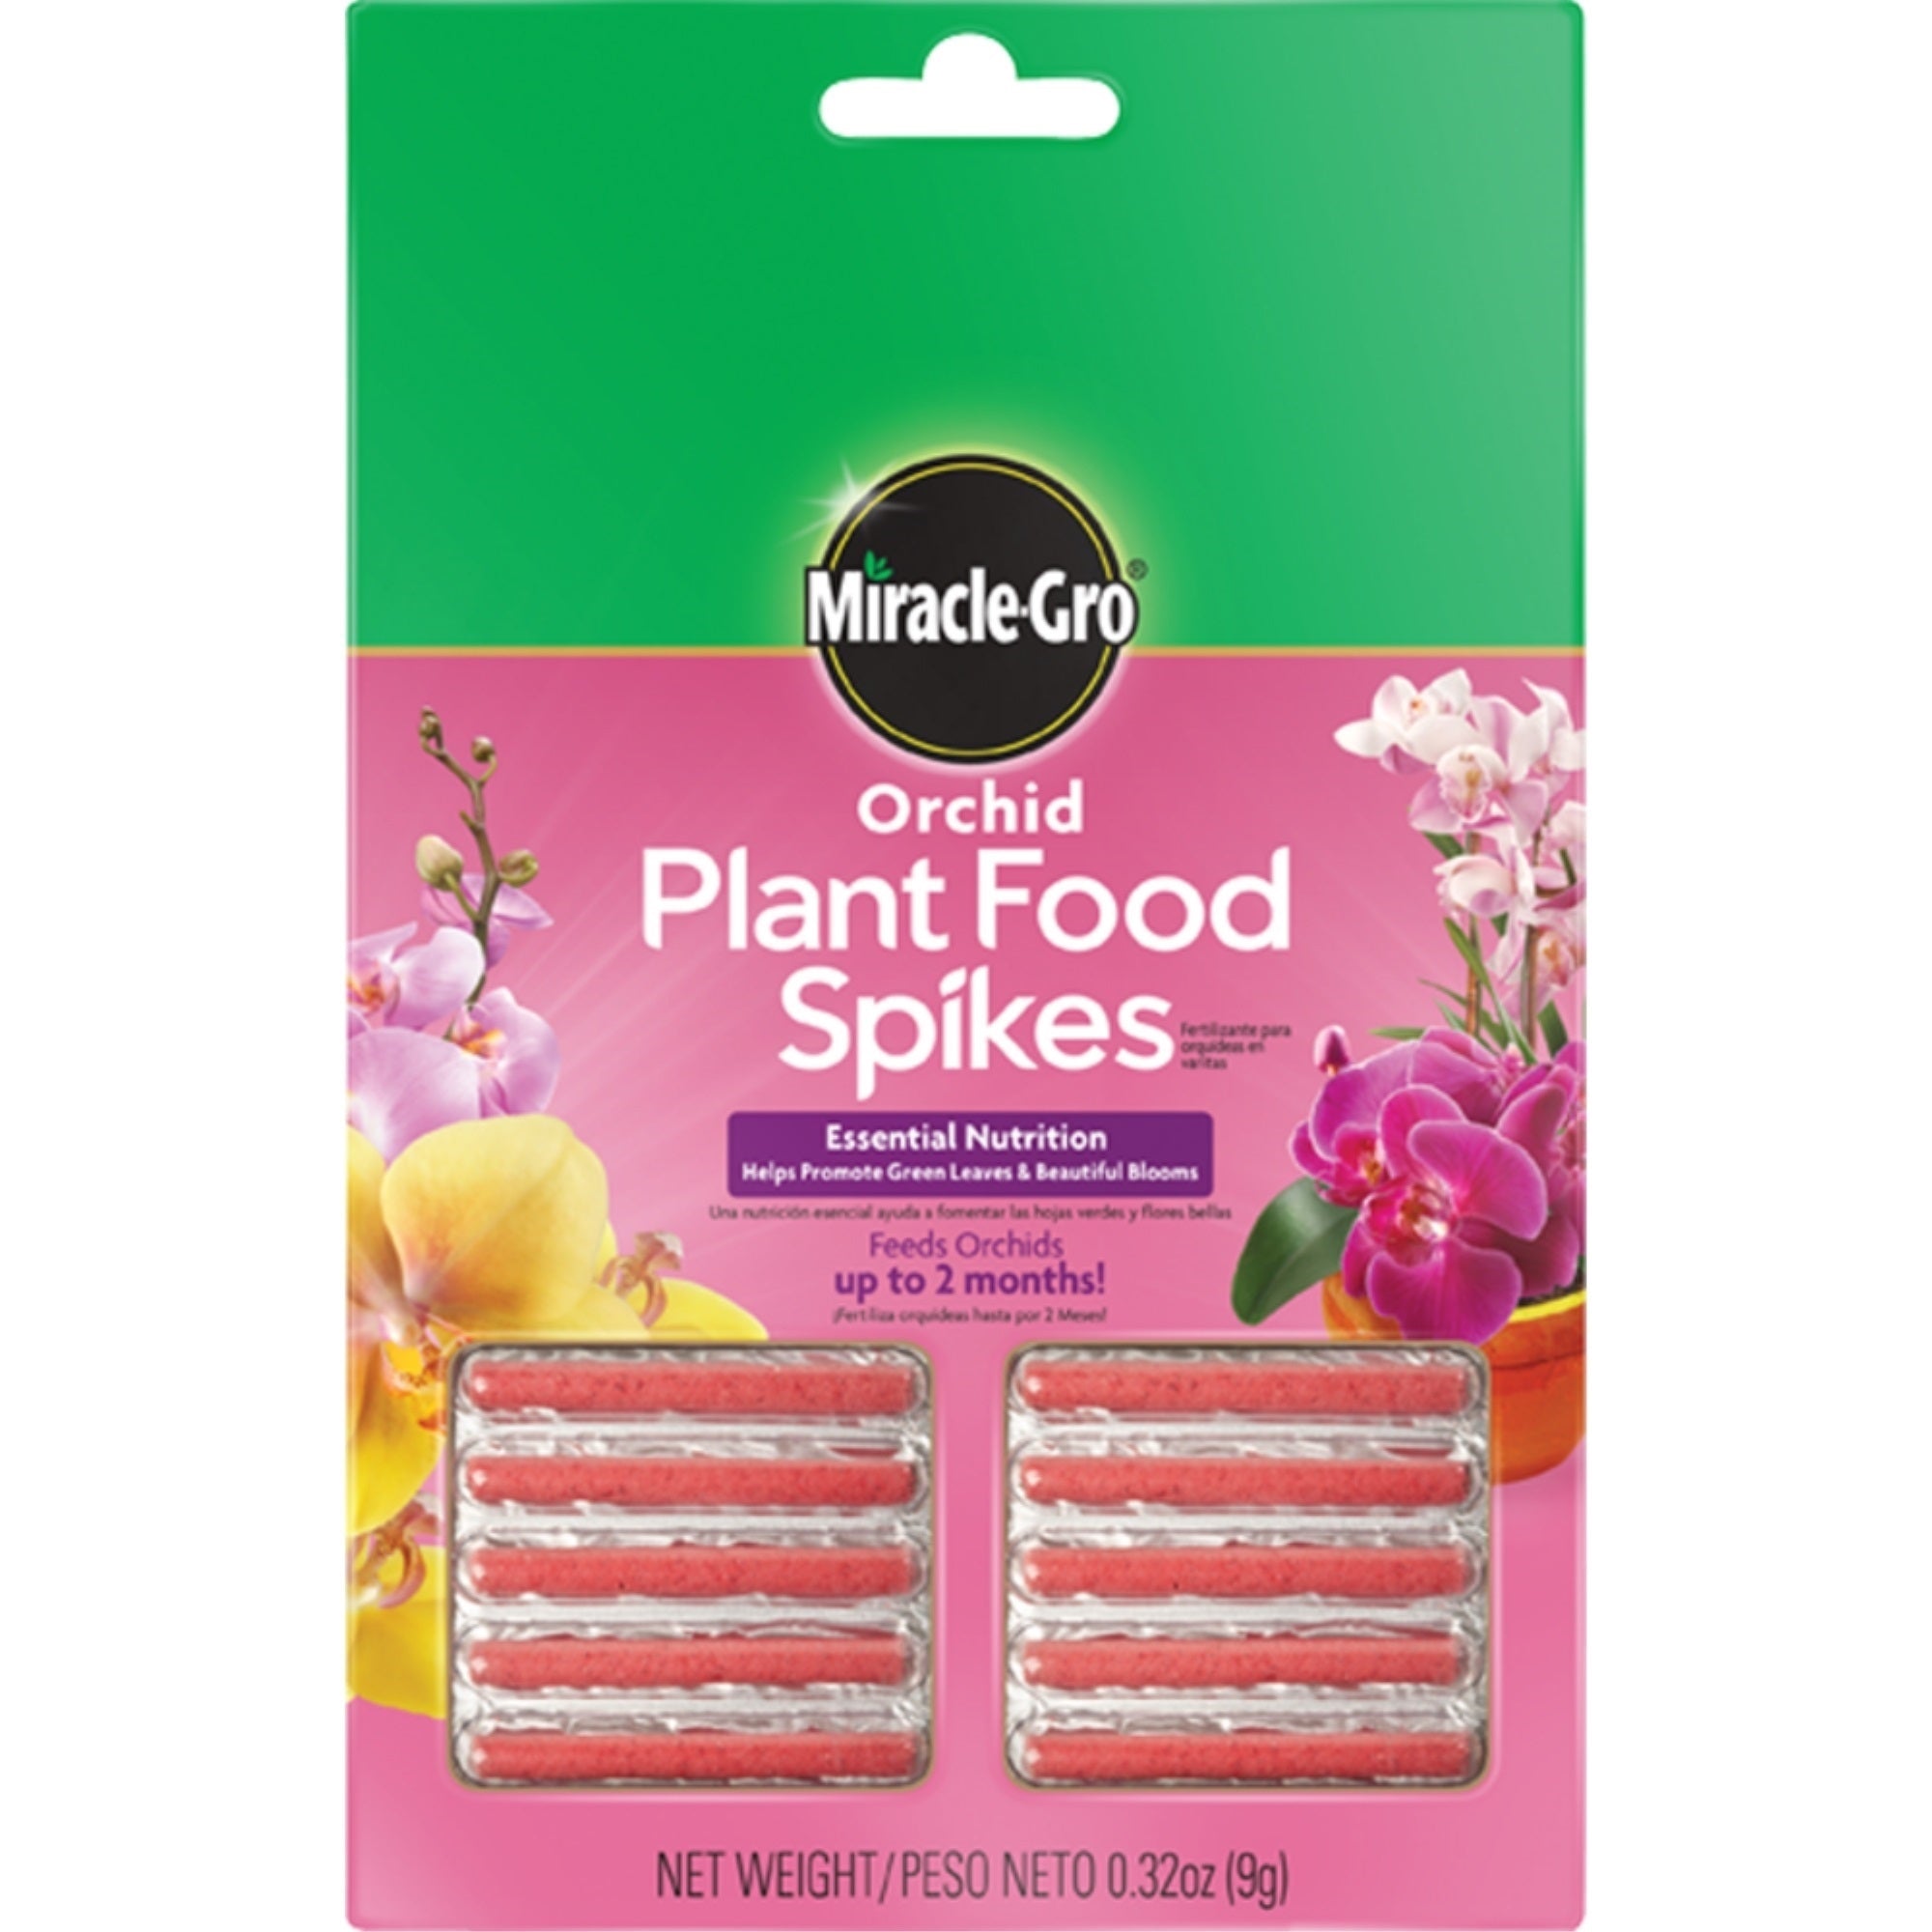 Miracle-Gro Orchid Plant Food Spikes (10 spikes per pack)